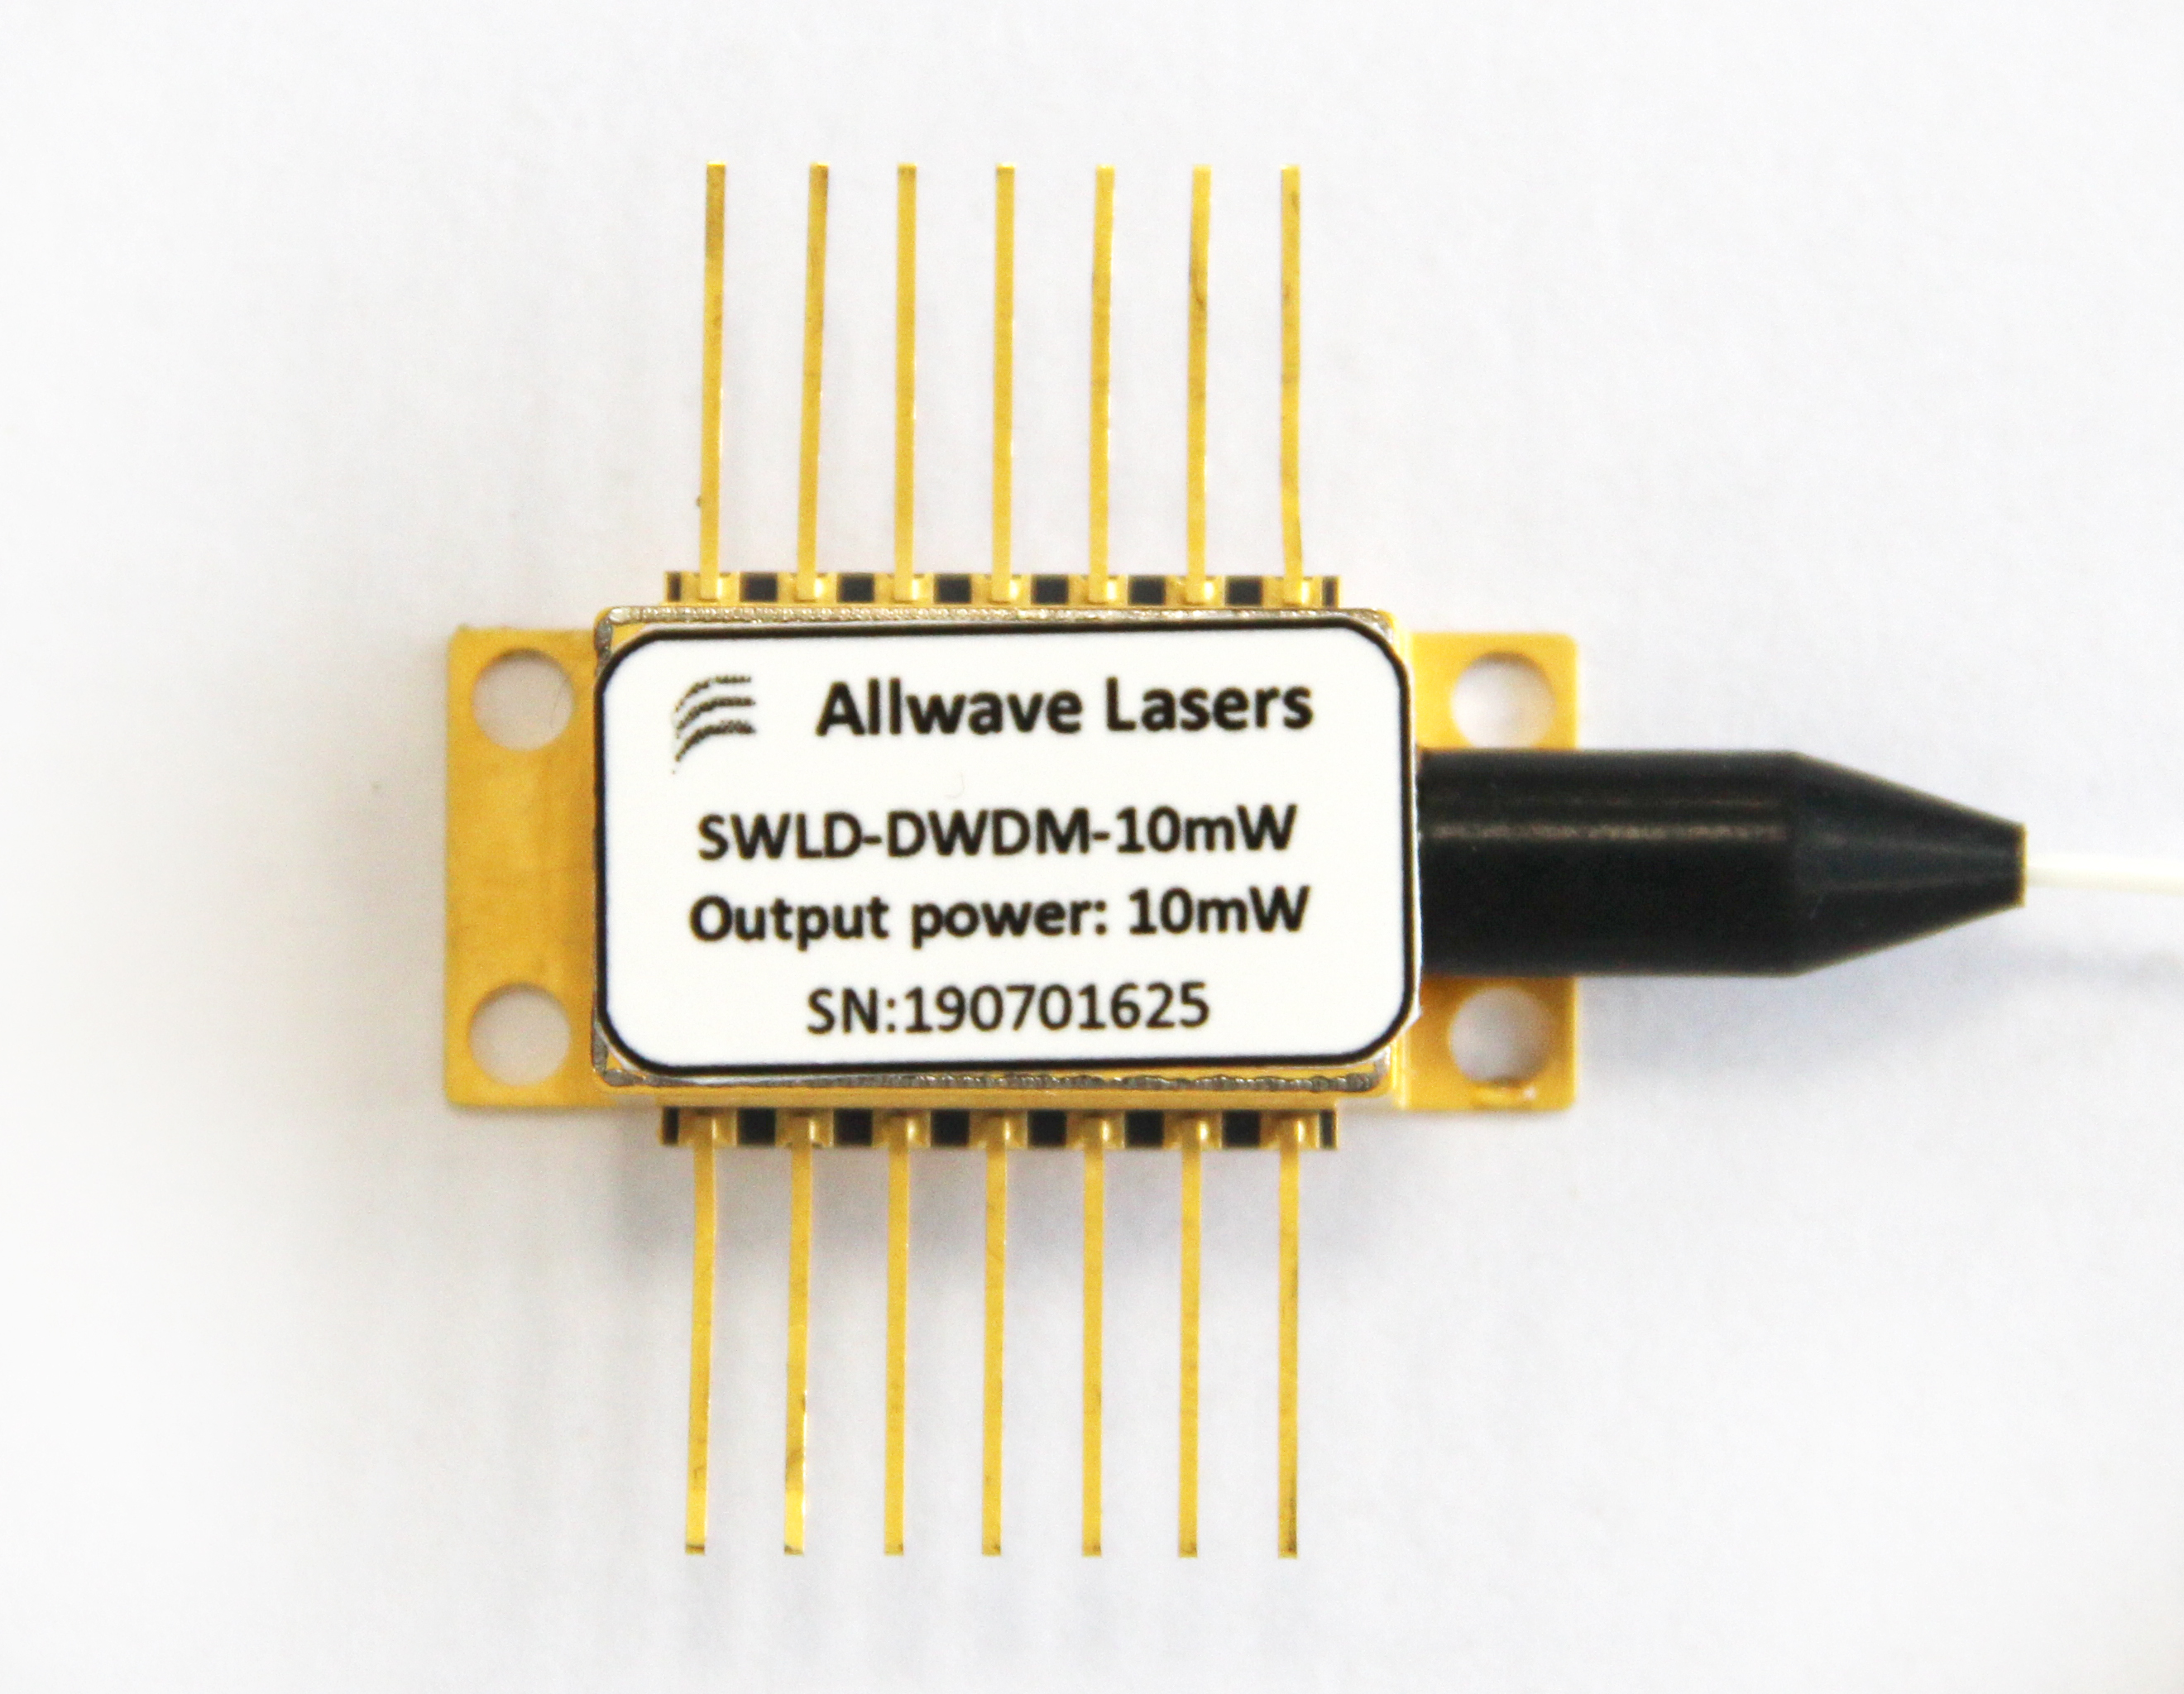 <b>DFB Butterfly Laser Diodes</b>